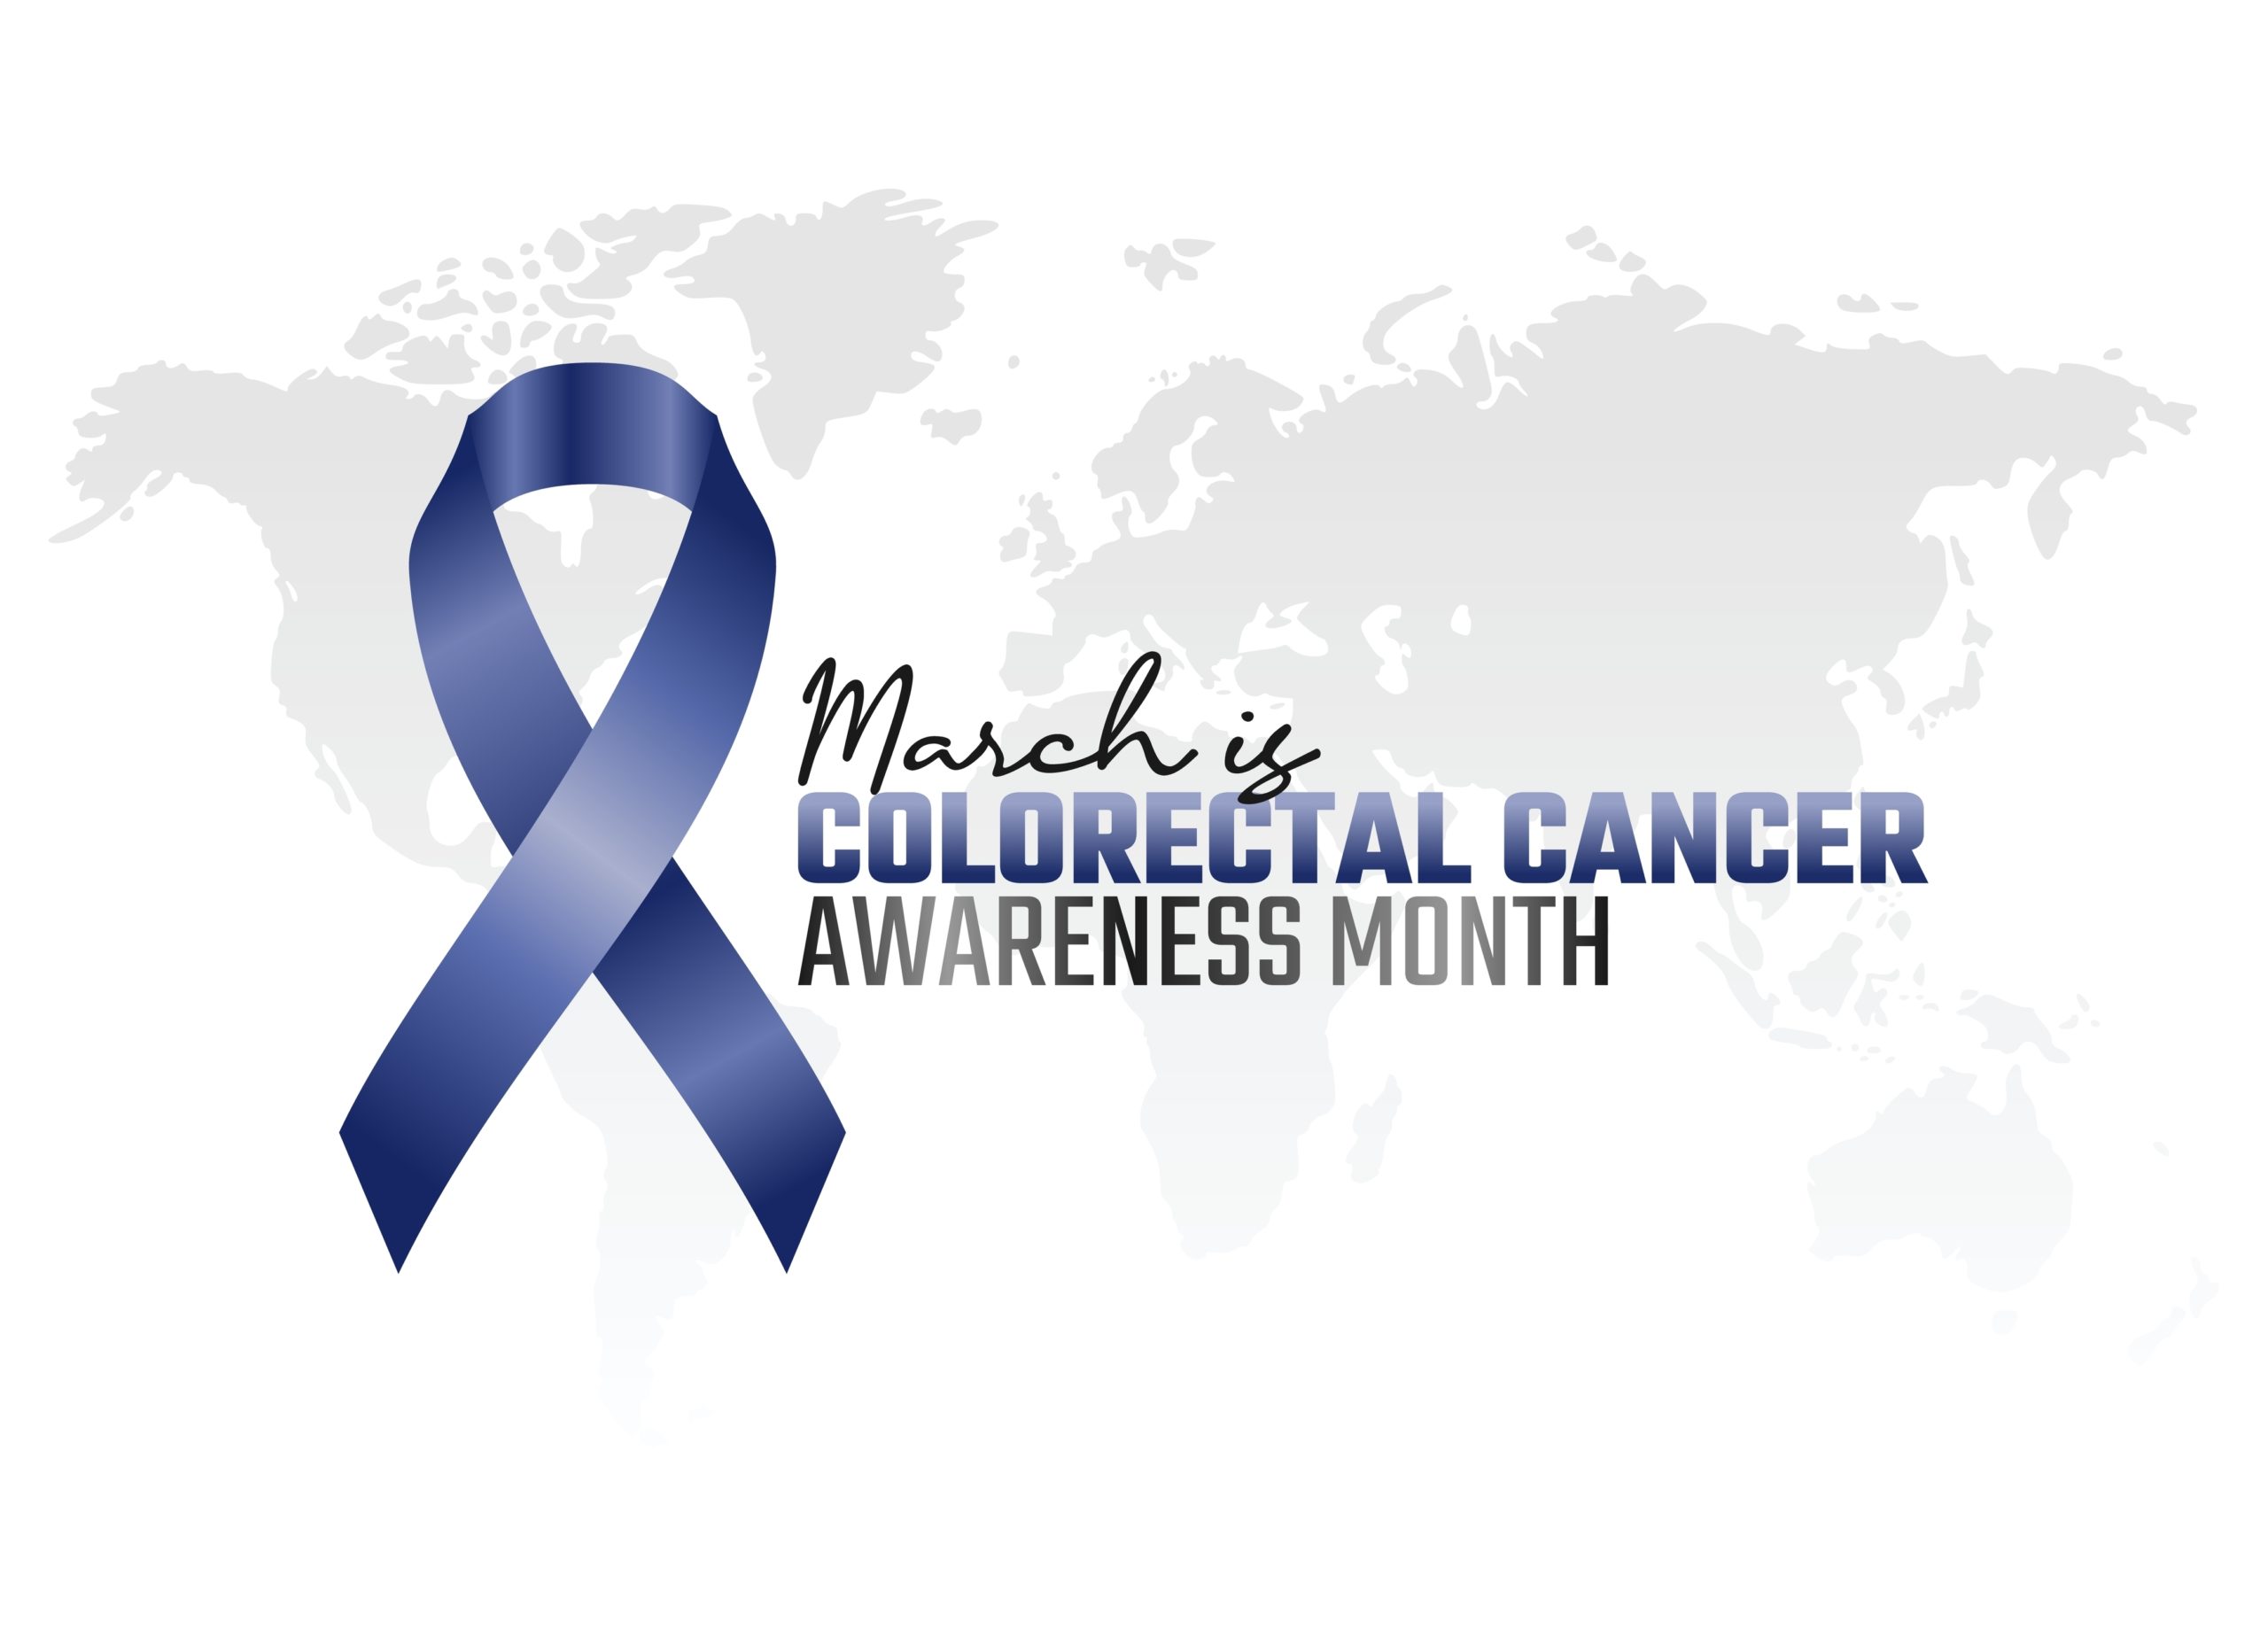 Colorectal Cancer Awareness Month: March